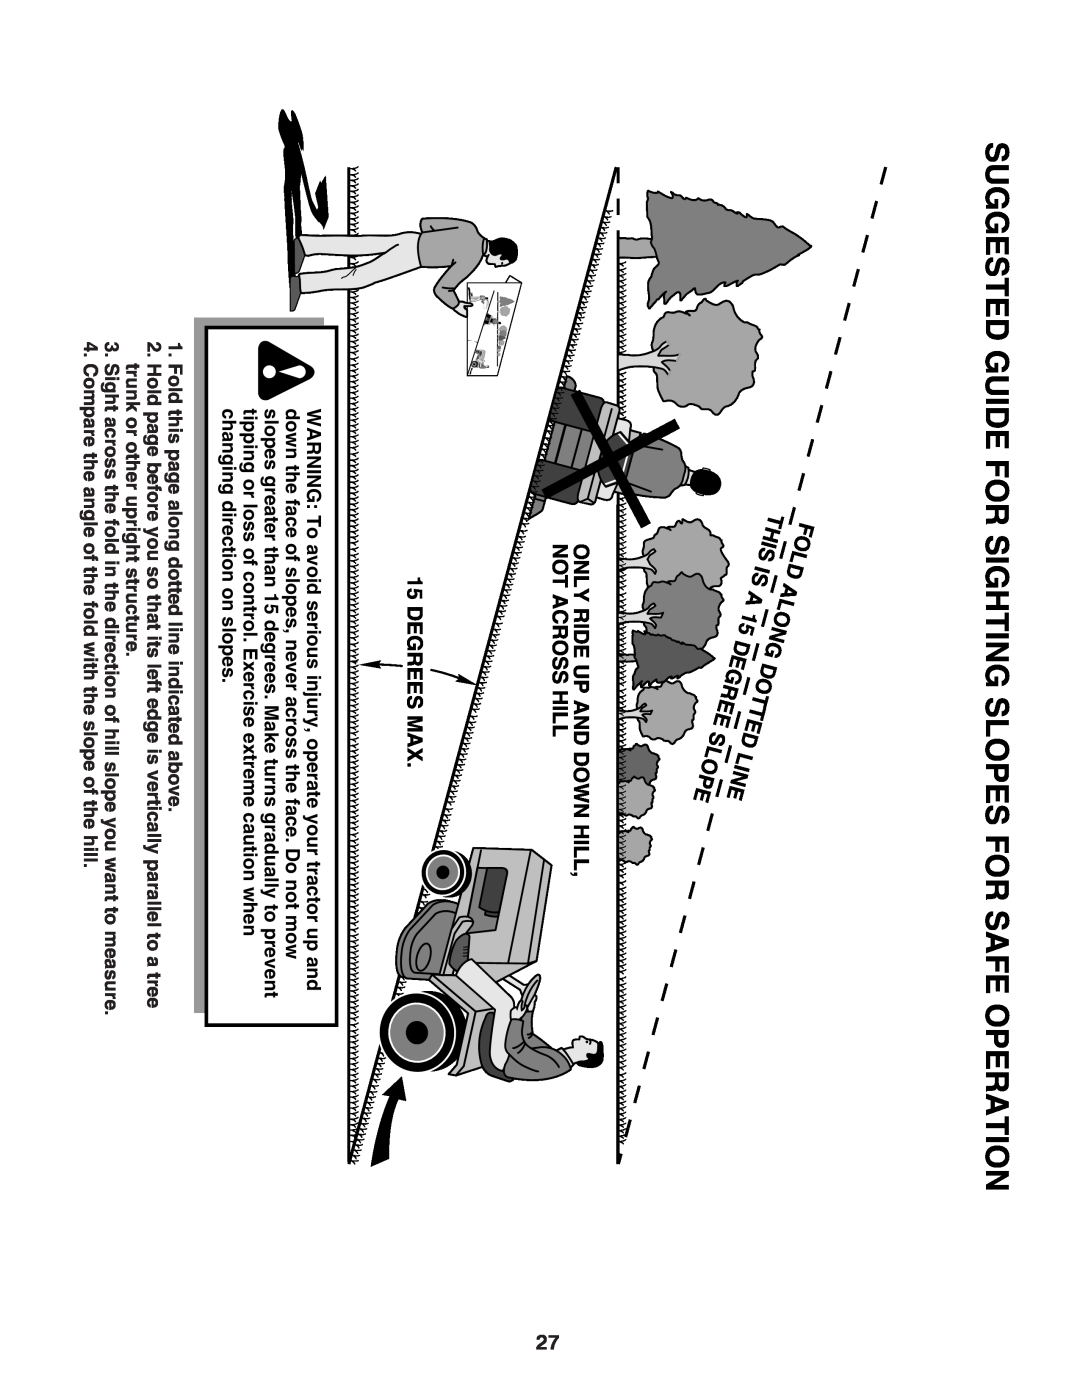 Poulan 96048001800, 532 43 84-93 manual Suggested Guide For Sighting Slopes For Safe Operation 